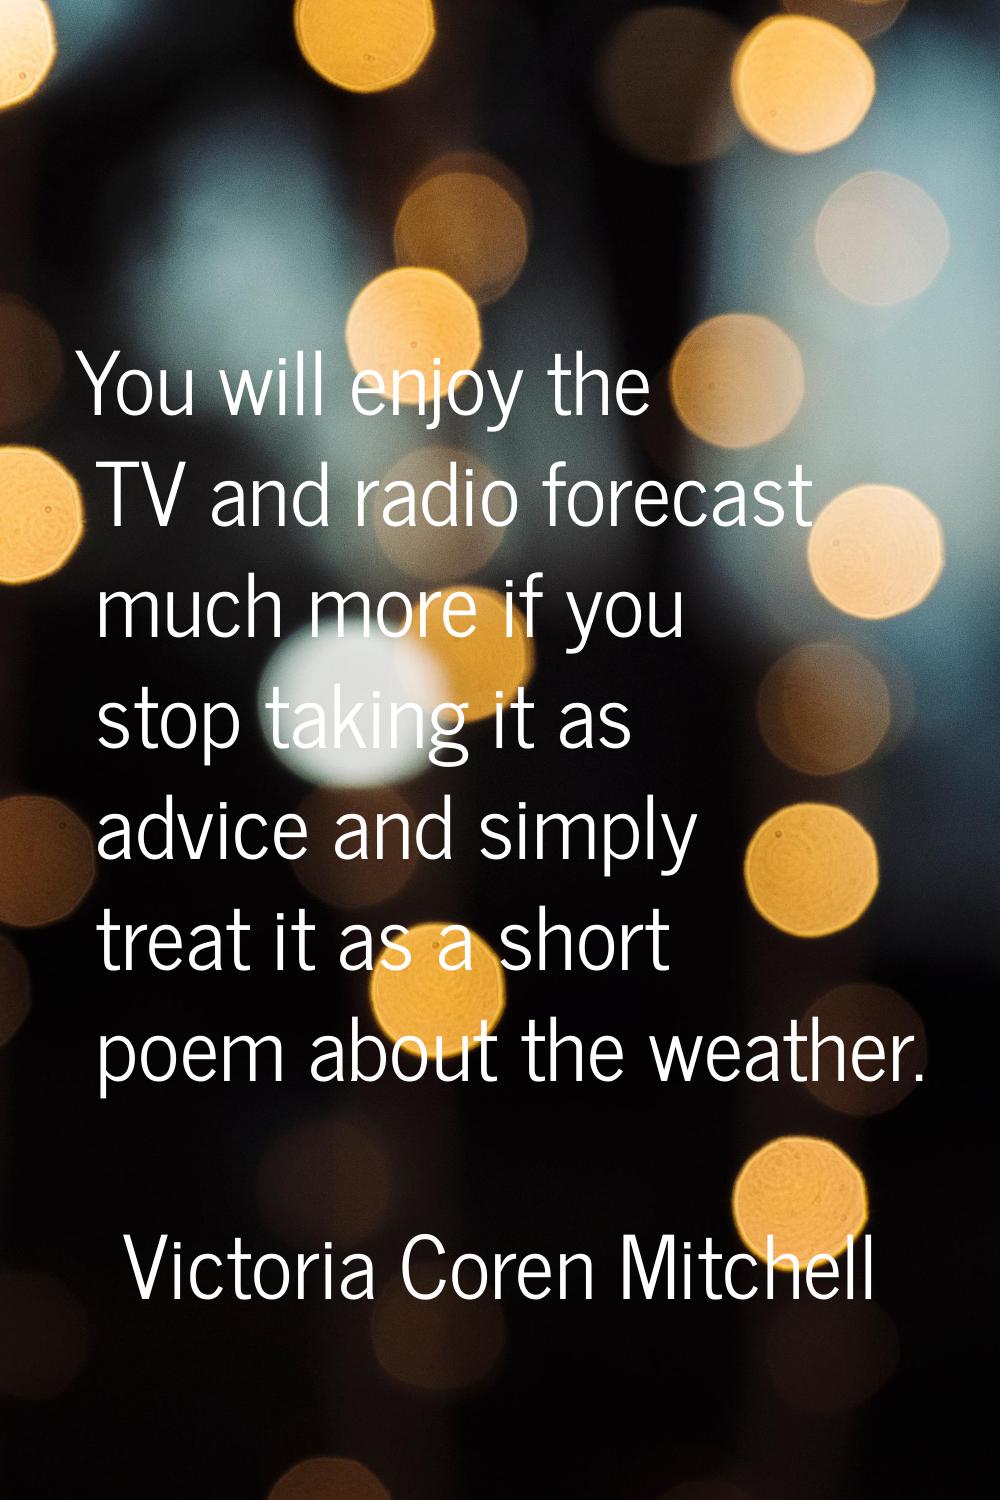 You will enjoy the TV and radio forecast much more if you stop taking it as advice and simply treat